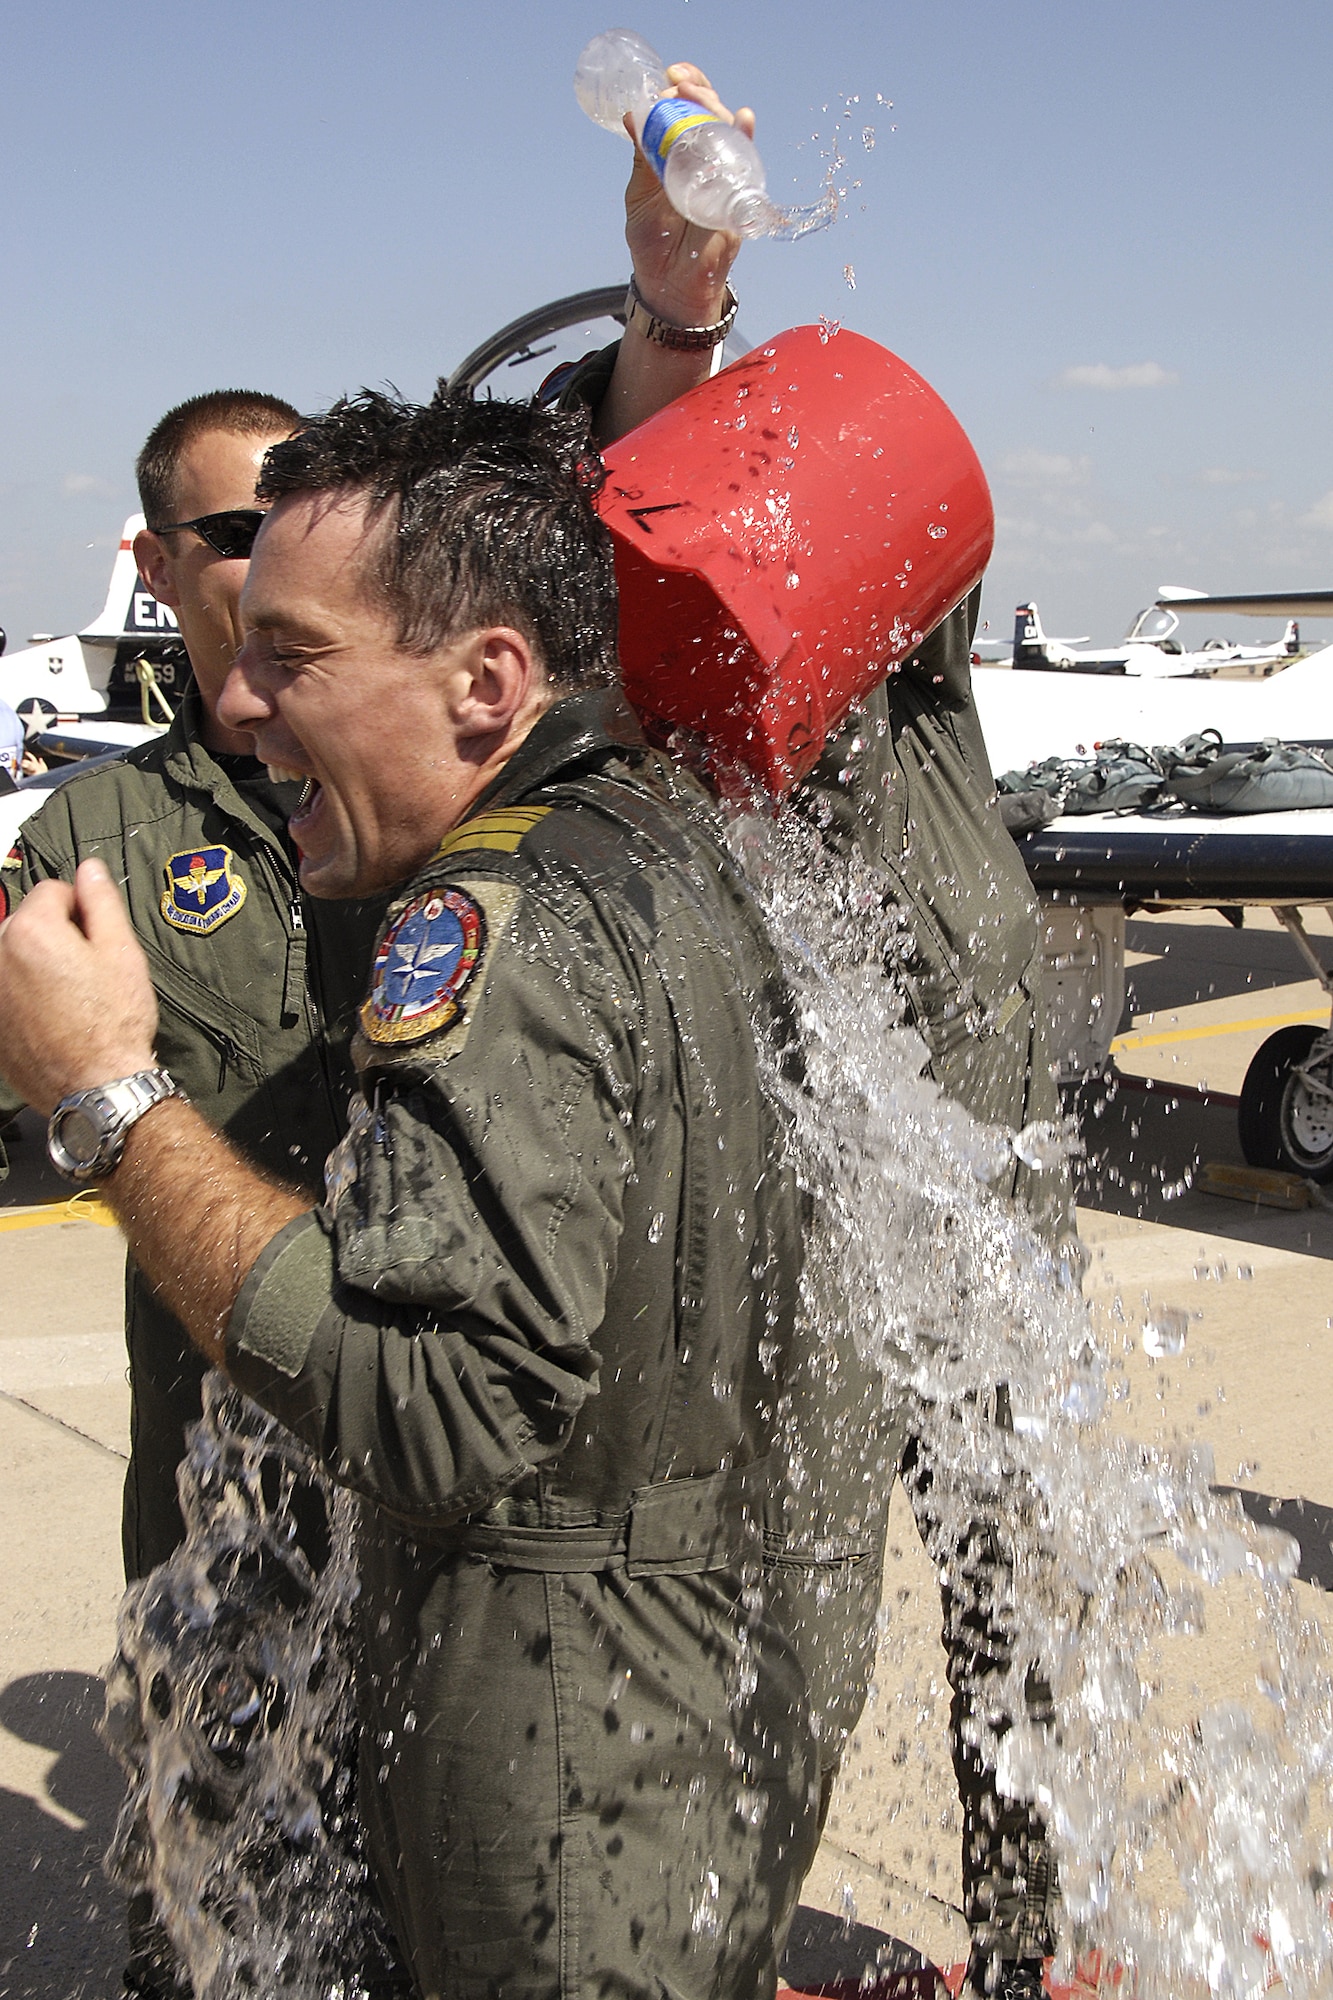 Cmdr. German Navy Peter Schroth is given a ceremonial dousing by fellow pilots following his final flight with the Euro-NATO Joint Jet Pilot Training Program April 24. Commander Schroth's retirement marks the end of figher-bomber pilots in the German navy, as well as the participation of the country's navy pilot in ENJJPT. (U.S. Air Force photo/Harry Tonemah)